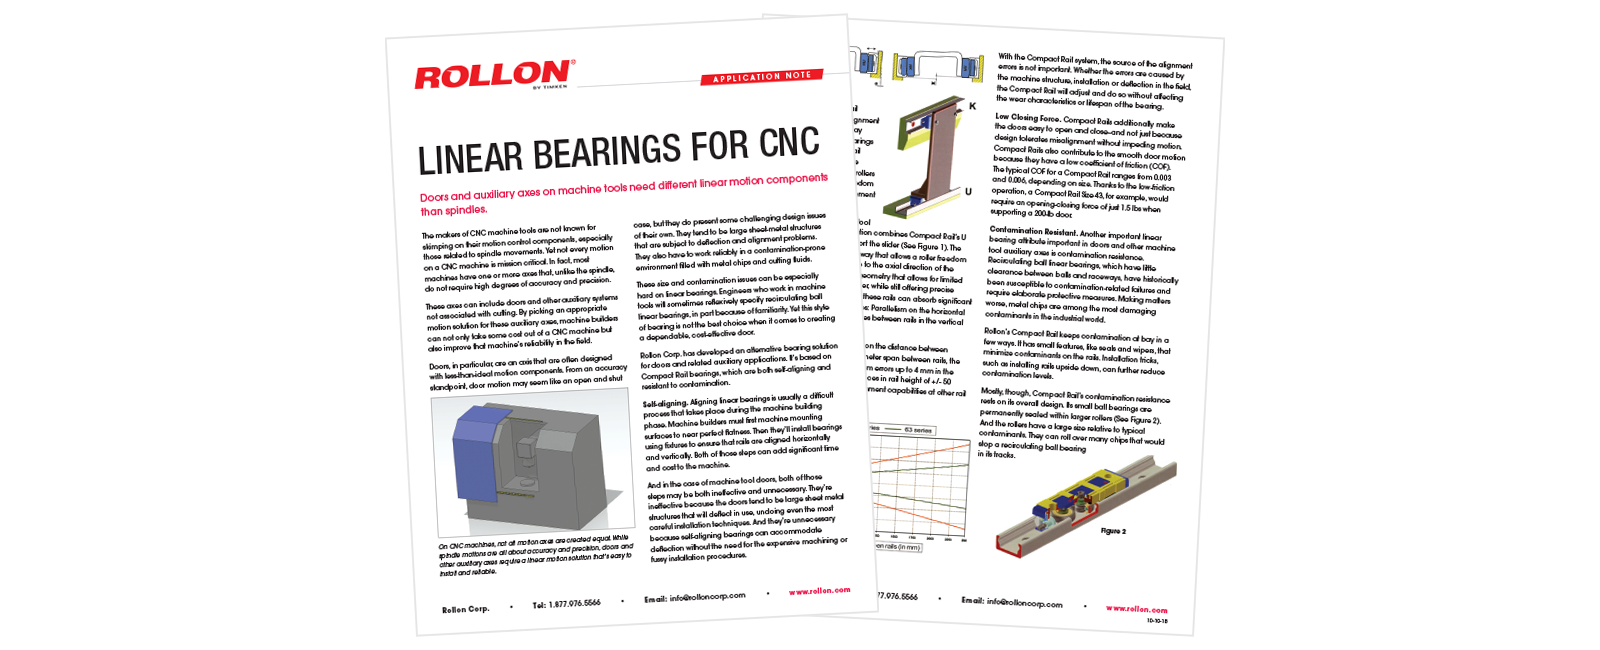 Linear Bearings for CNC